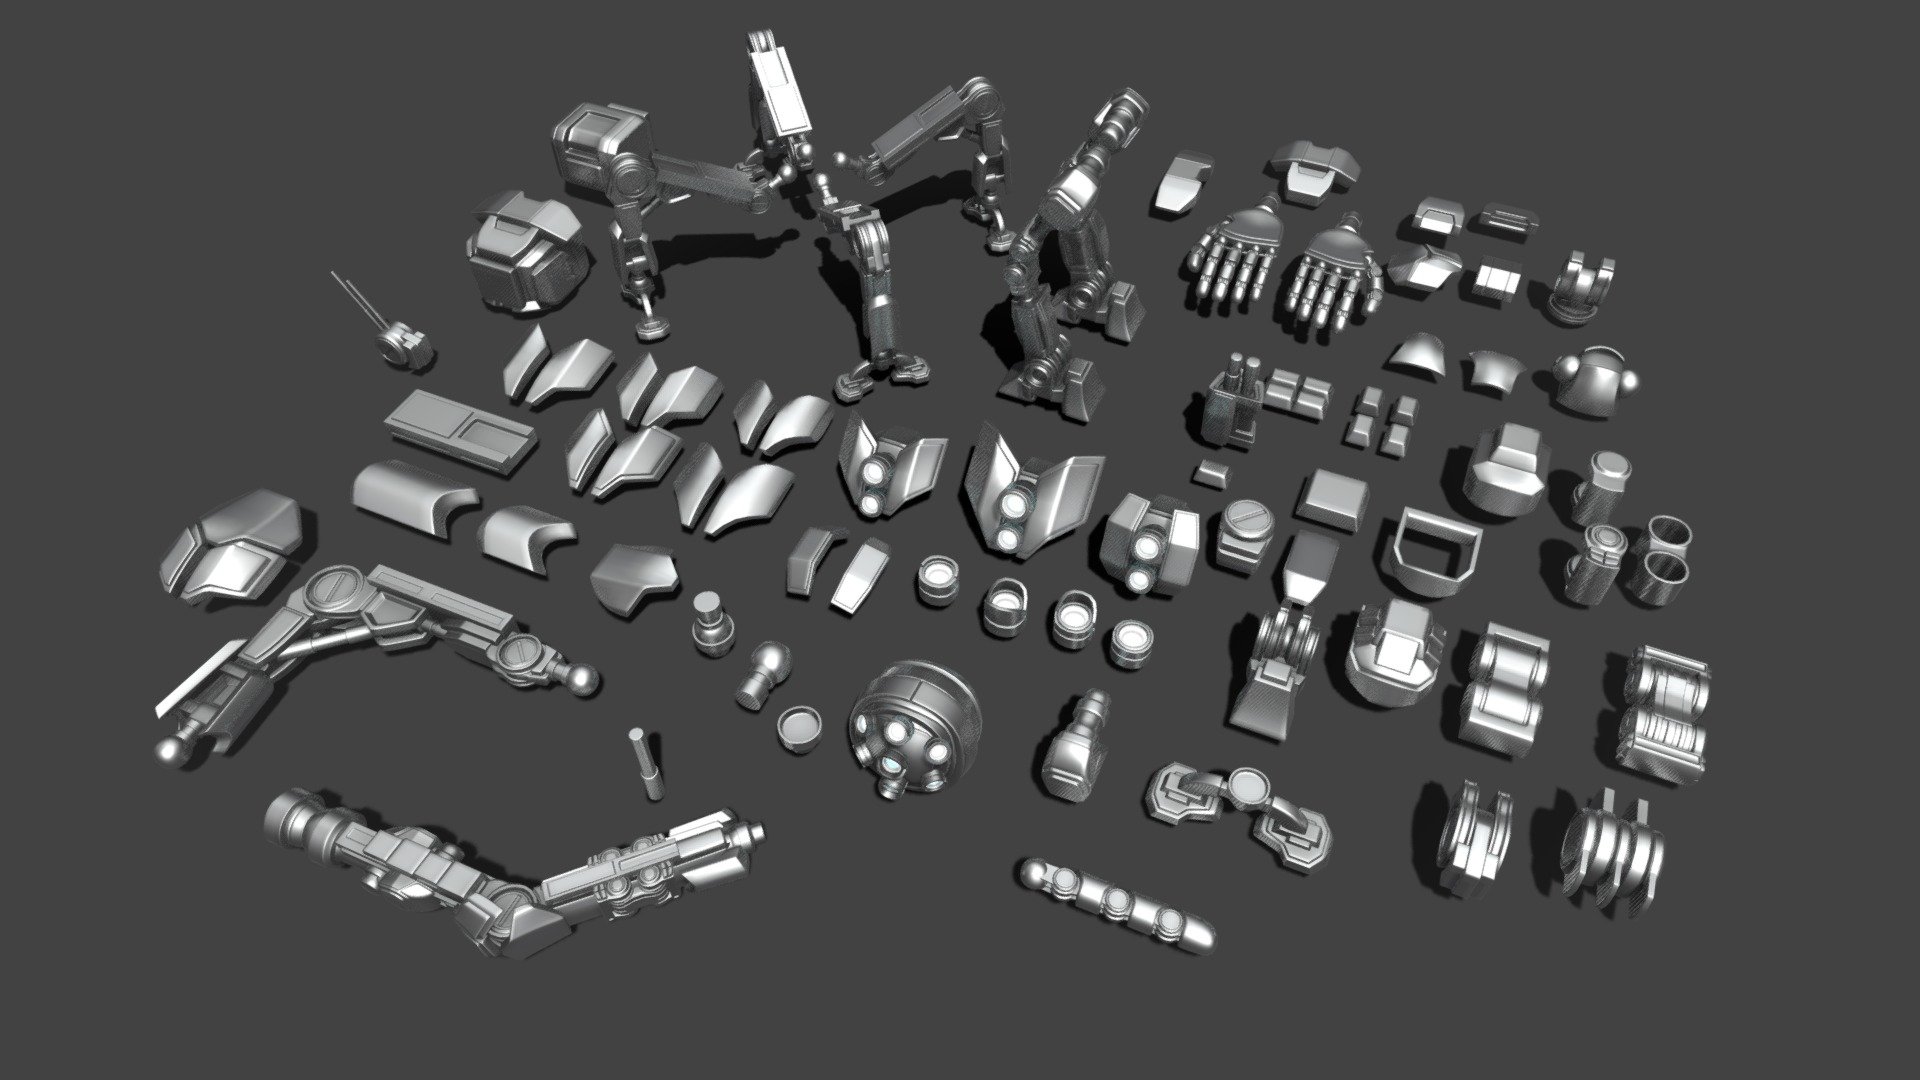 Check more of our assets here: https://framemov.com/framestock/

From hinges and armor plates to fully done hands, legs and even heads for all your robot related 3d projects.

stay tuned for our next upload! - Robot parts (kitbash pack) - Buy Royalty Free 3D model by framestock 3d model